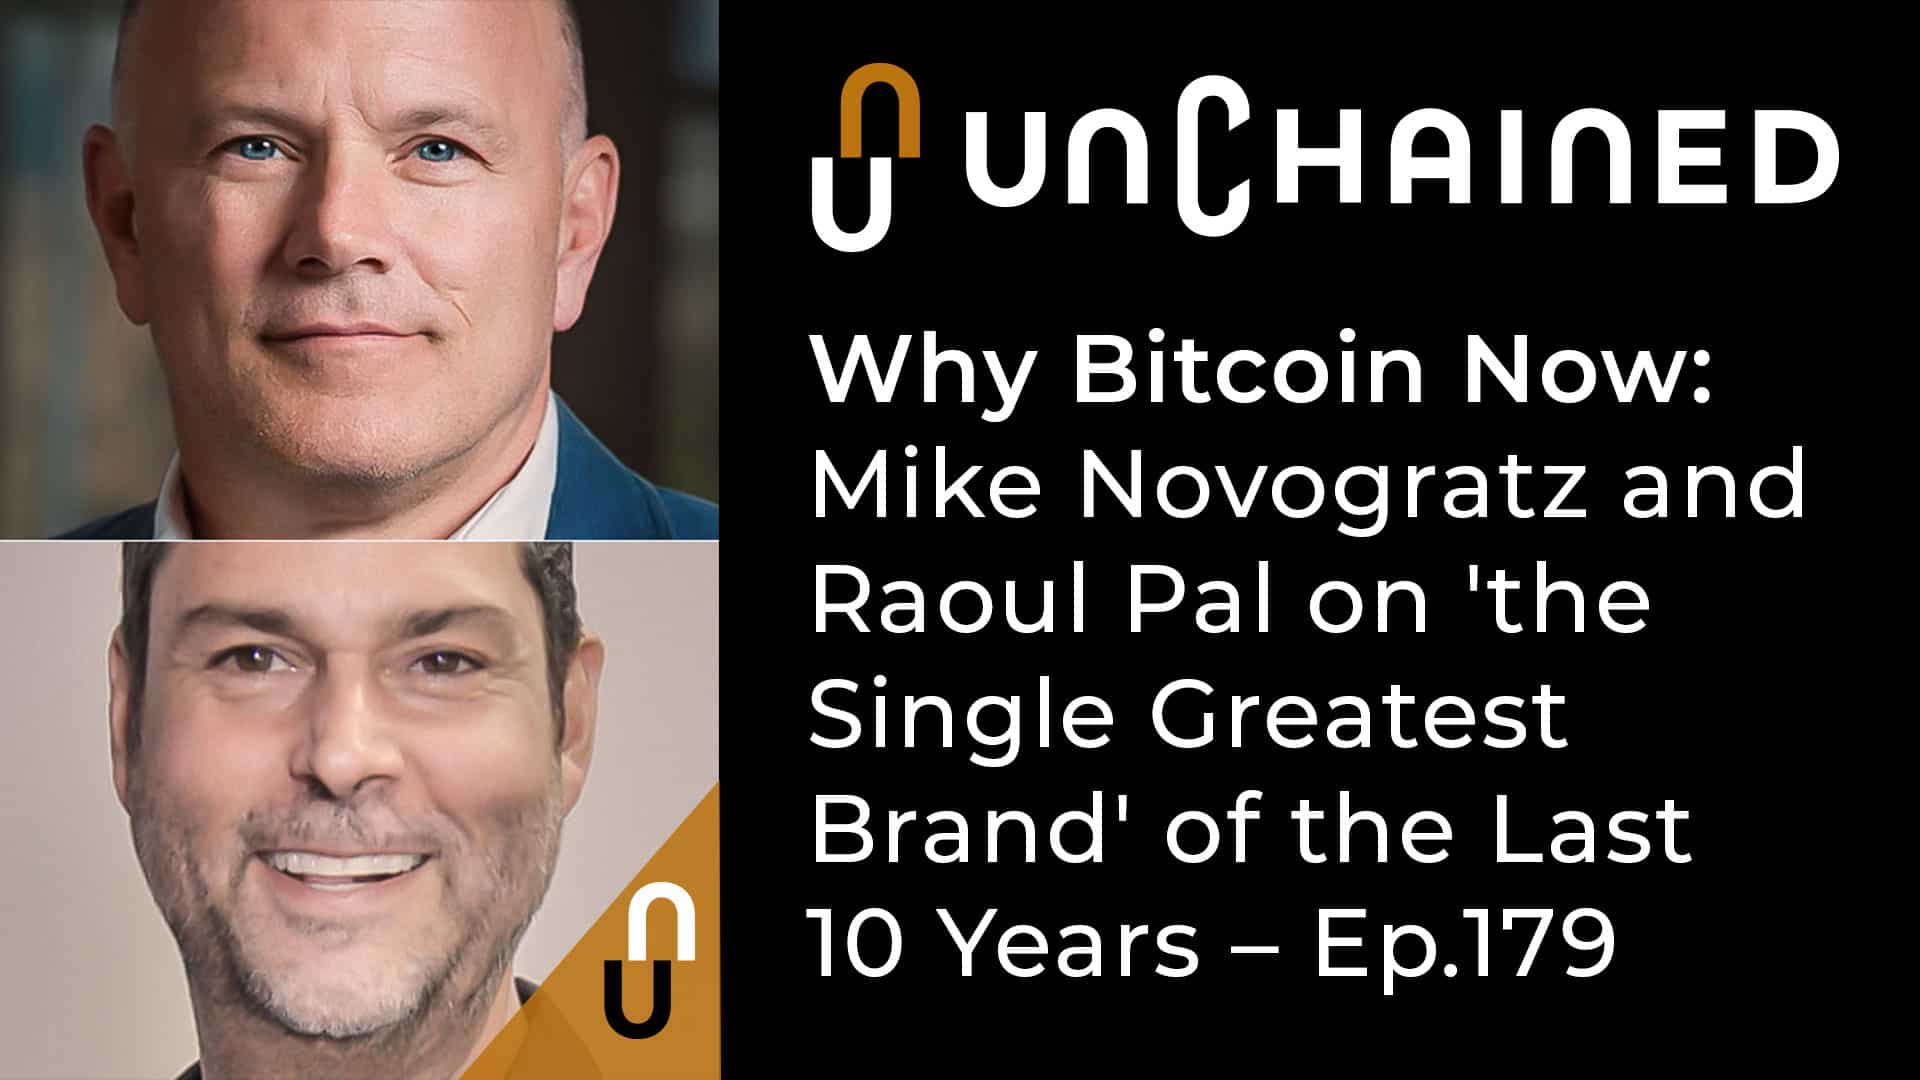 Why Bitcoin Now: Mike Novogratz and Raoul Pal on 'the Single